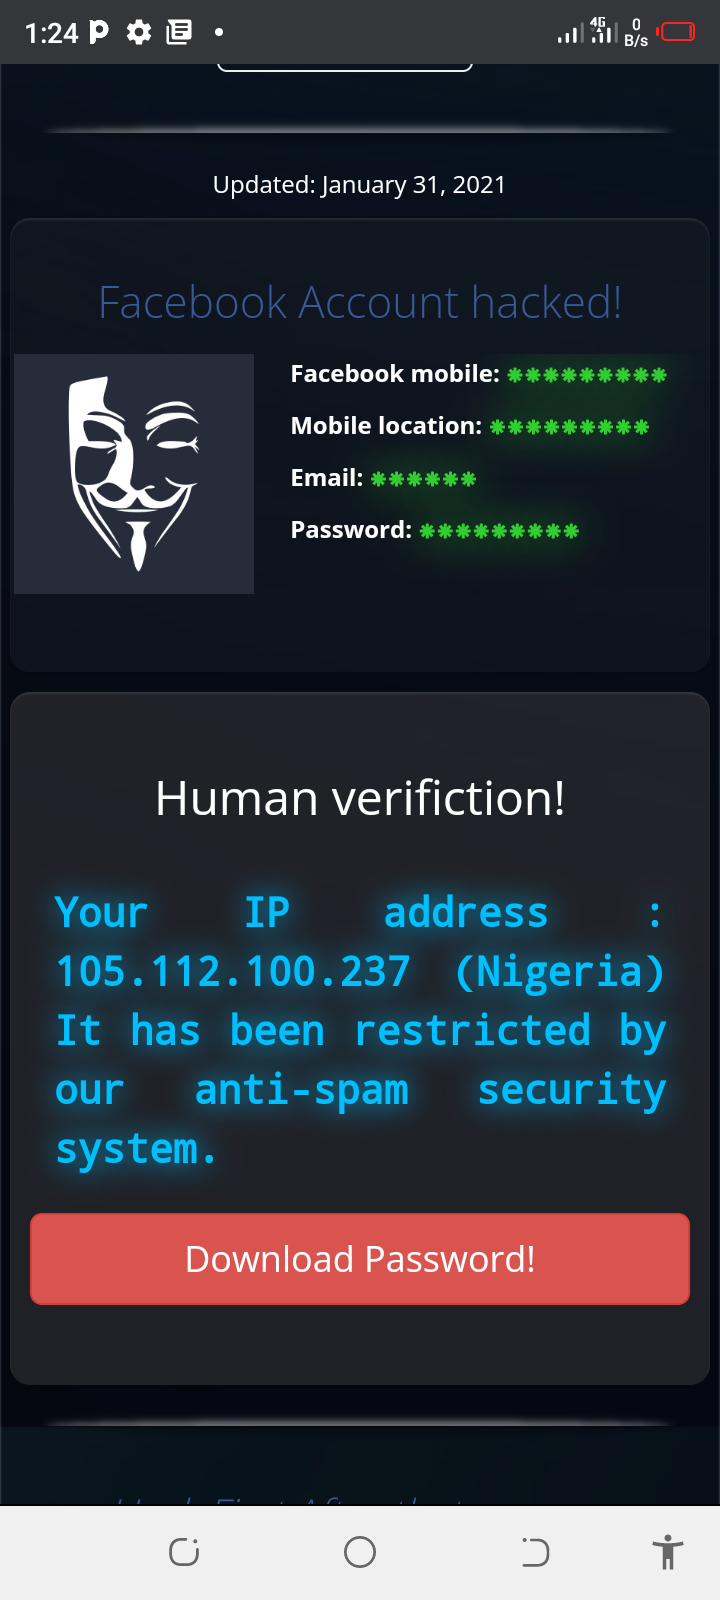 hacking_17143937413SIISt.png